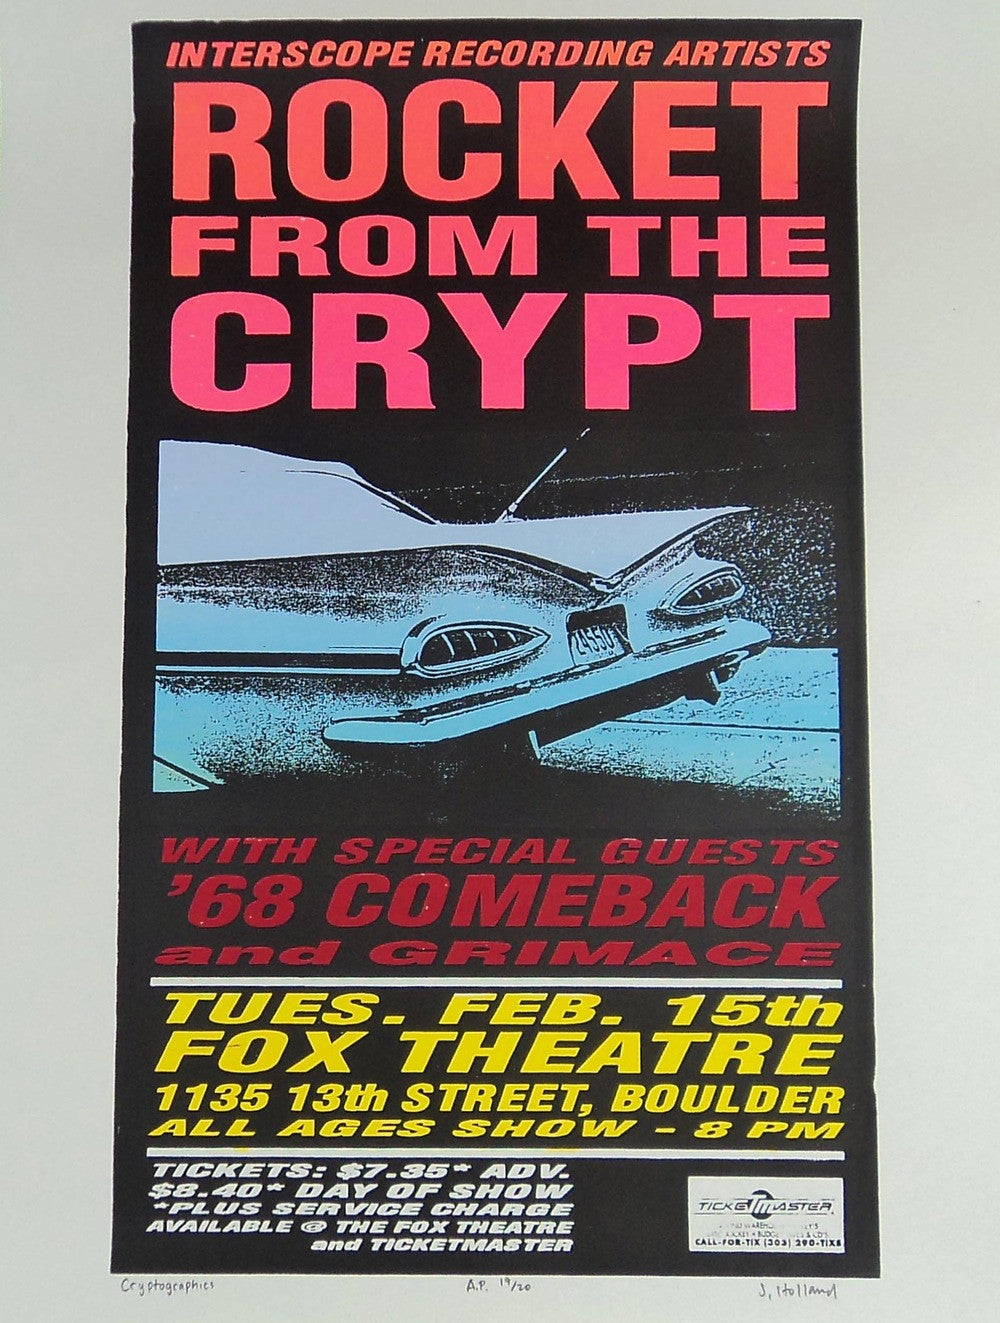 Jeff Holland - 1996 - Rocket From The Crypt (AP) Poster